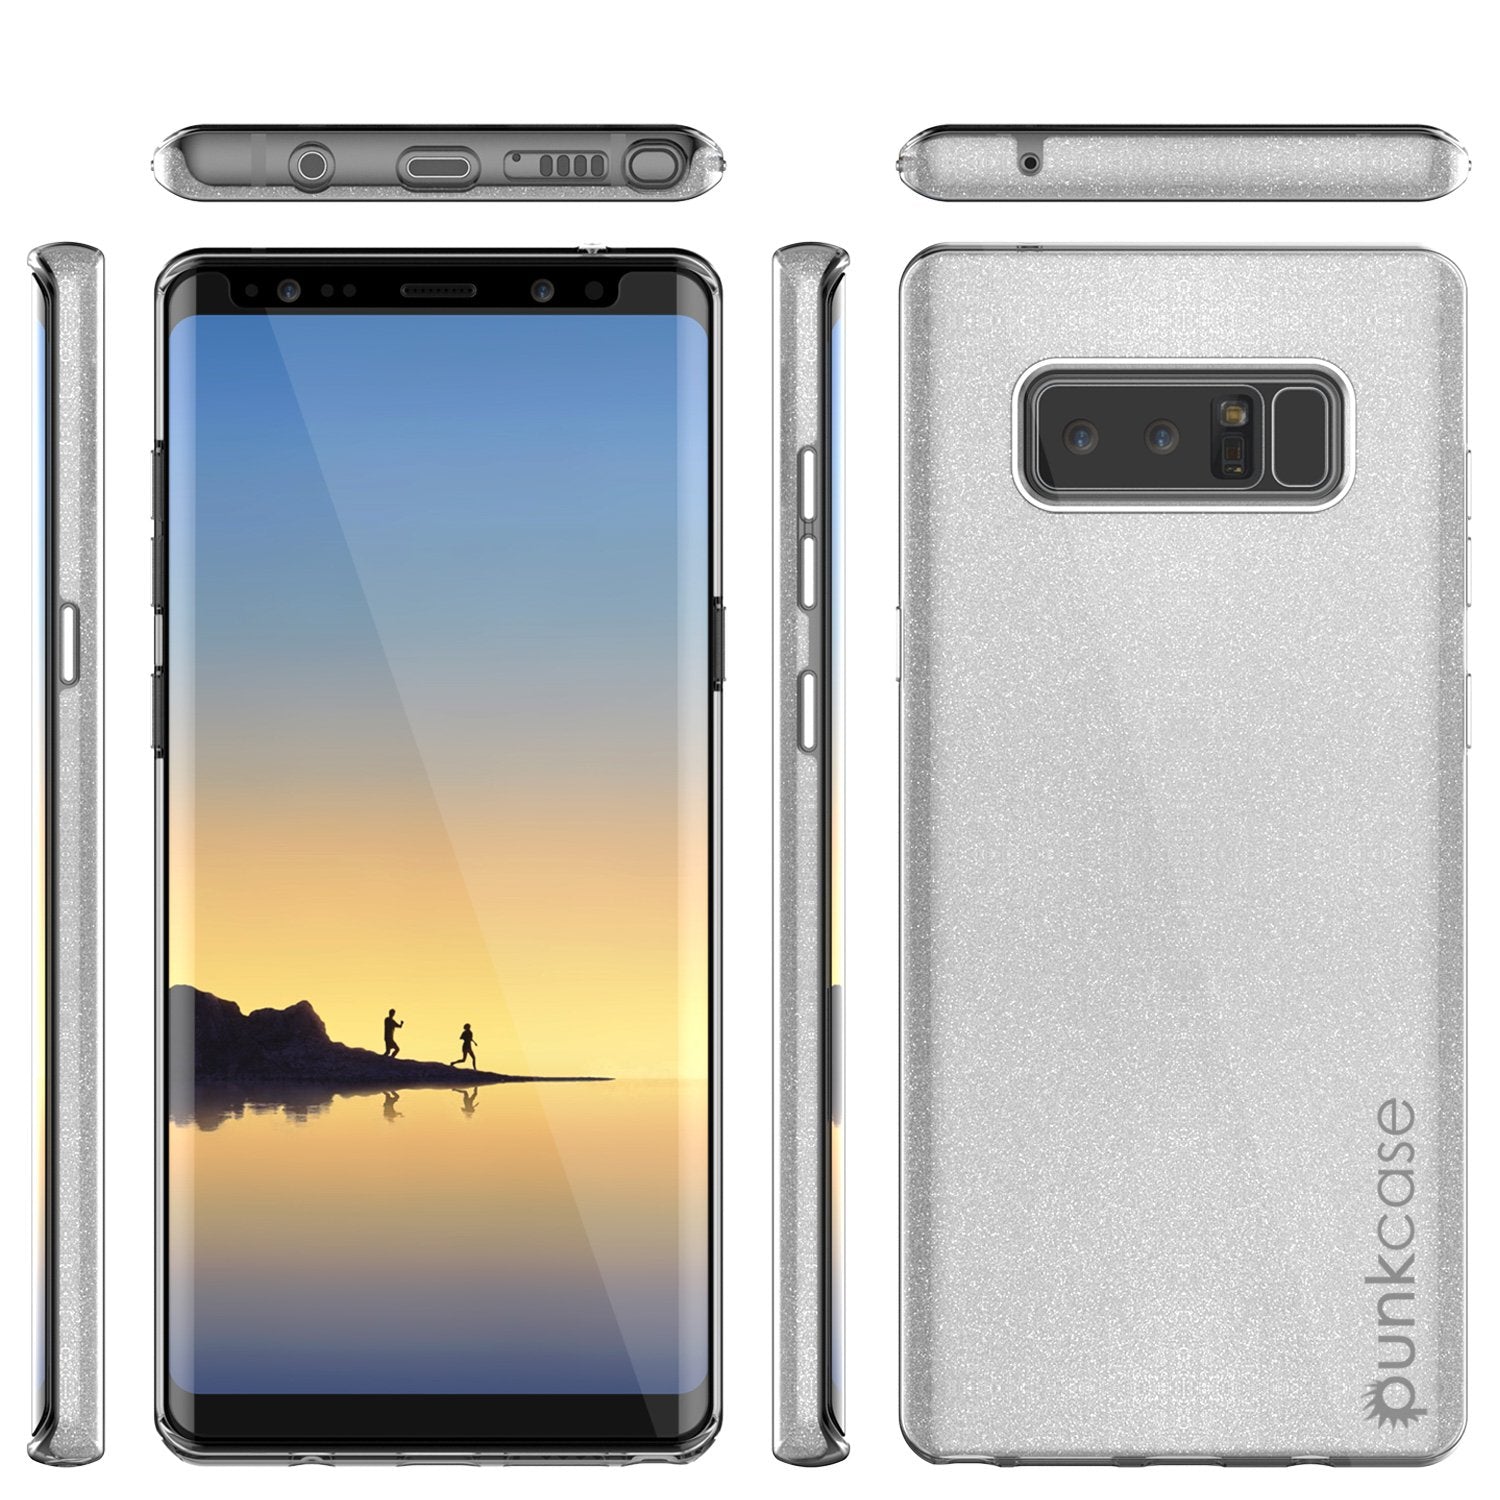 Galaxy Note 8 Case, Punkcase Galactic 2.0 Series Ultra Slim Protective Armor [Silver]